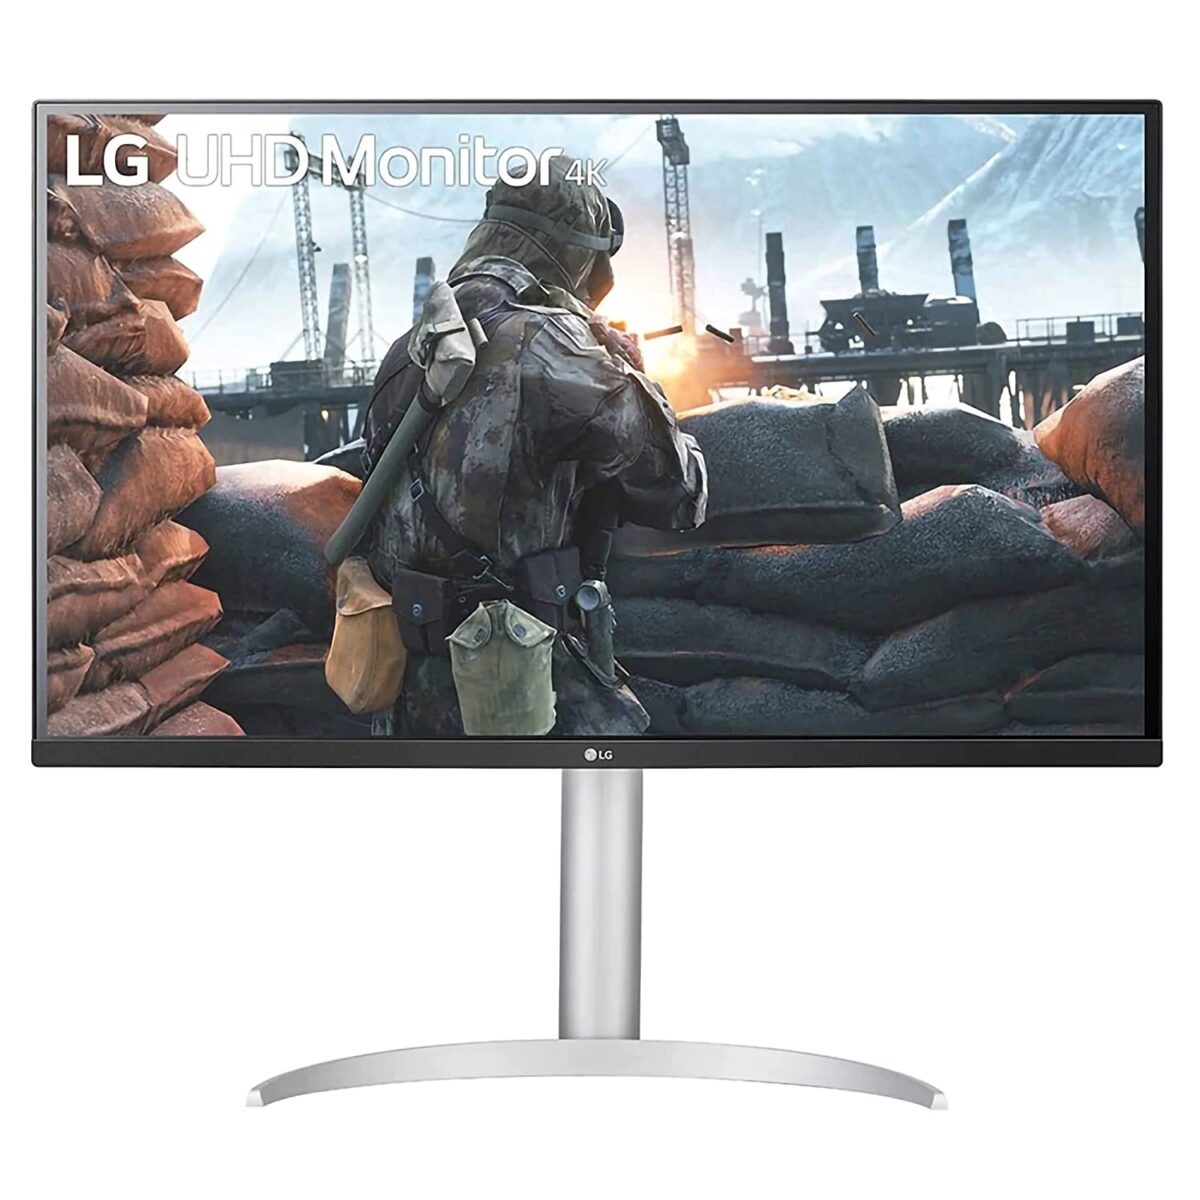 LG ‎32UP550N-W.ATR 4K UHD Monitor Launched in India ( DCI-P3 90% / USB Type C / HDR10 )